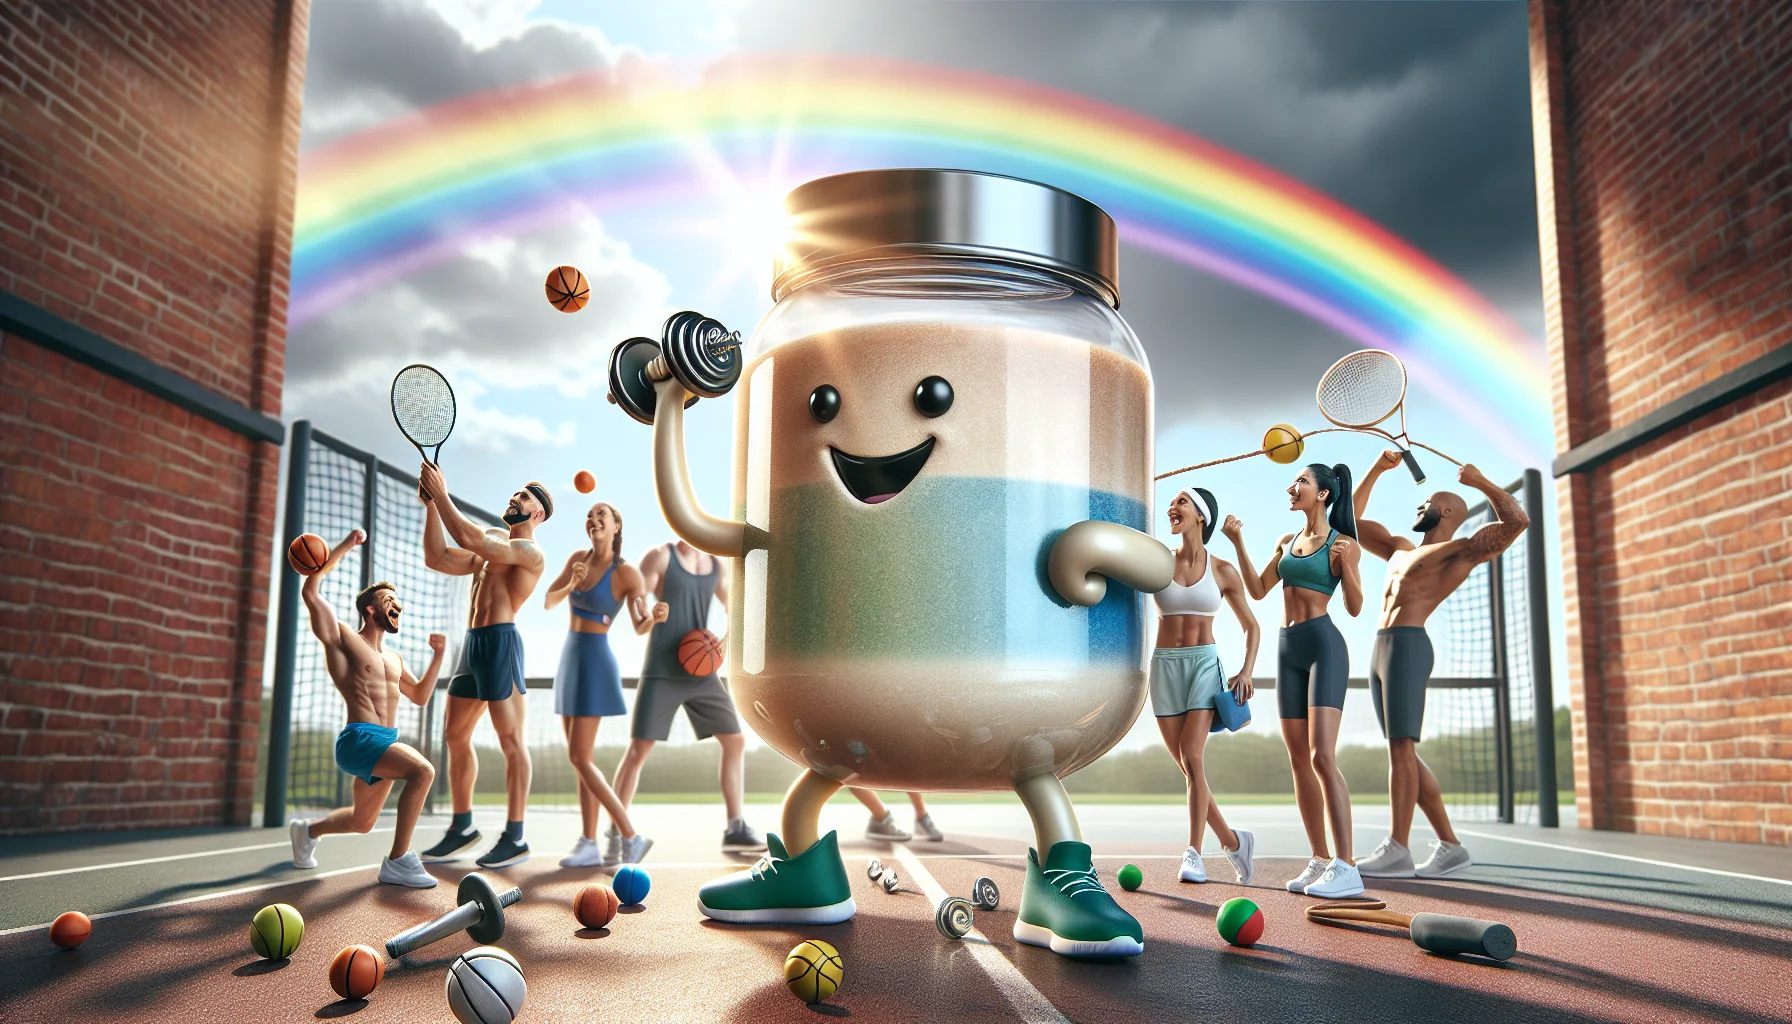 Create a detailed, realistic image of a clear whey protein jar engaged in an amusing scenario, in the style of an enticing advertisement. The protein jar basks in the sun alongside energetic people of diverse descents and genders, all sporting trendy athletic gear. They're all enjoy a day out participating in various sports like tennis, basketball, and weightlifting. The whey protein jar, with arms and a smile that's been humorously drawn, is lifting a tiny dumbbell. A dazzling rainbow arcs in the distance. This scene captures the fun ethos of using supplements for sports, suggesting viewers might also enjoy the benefits.